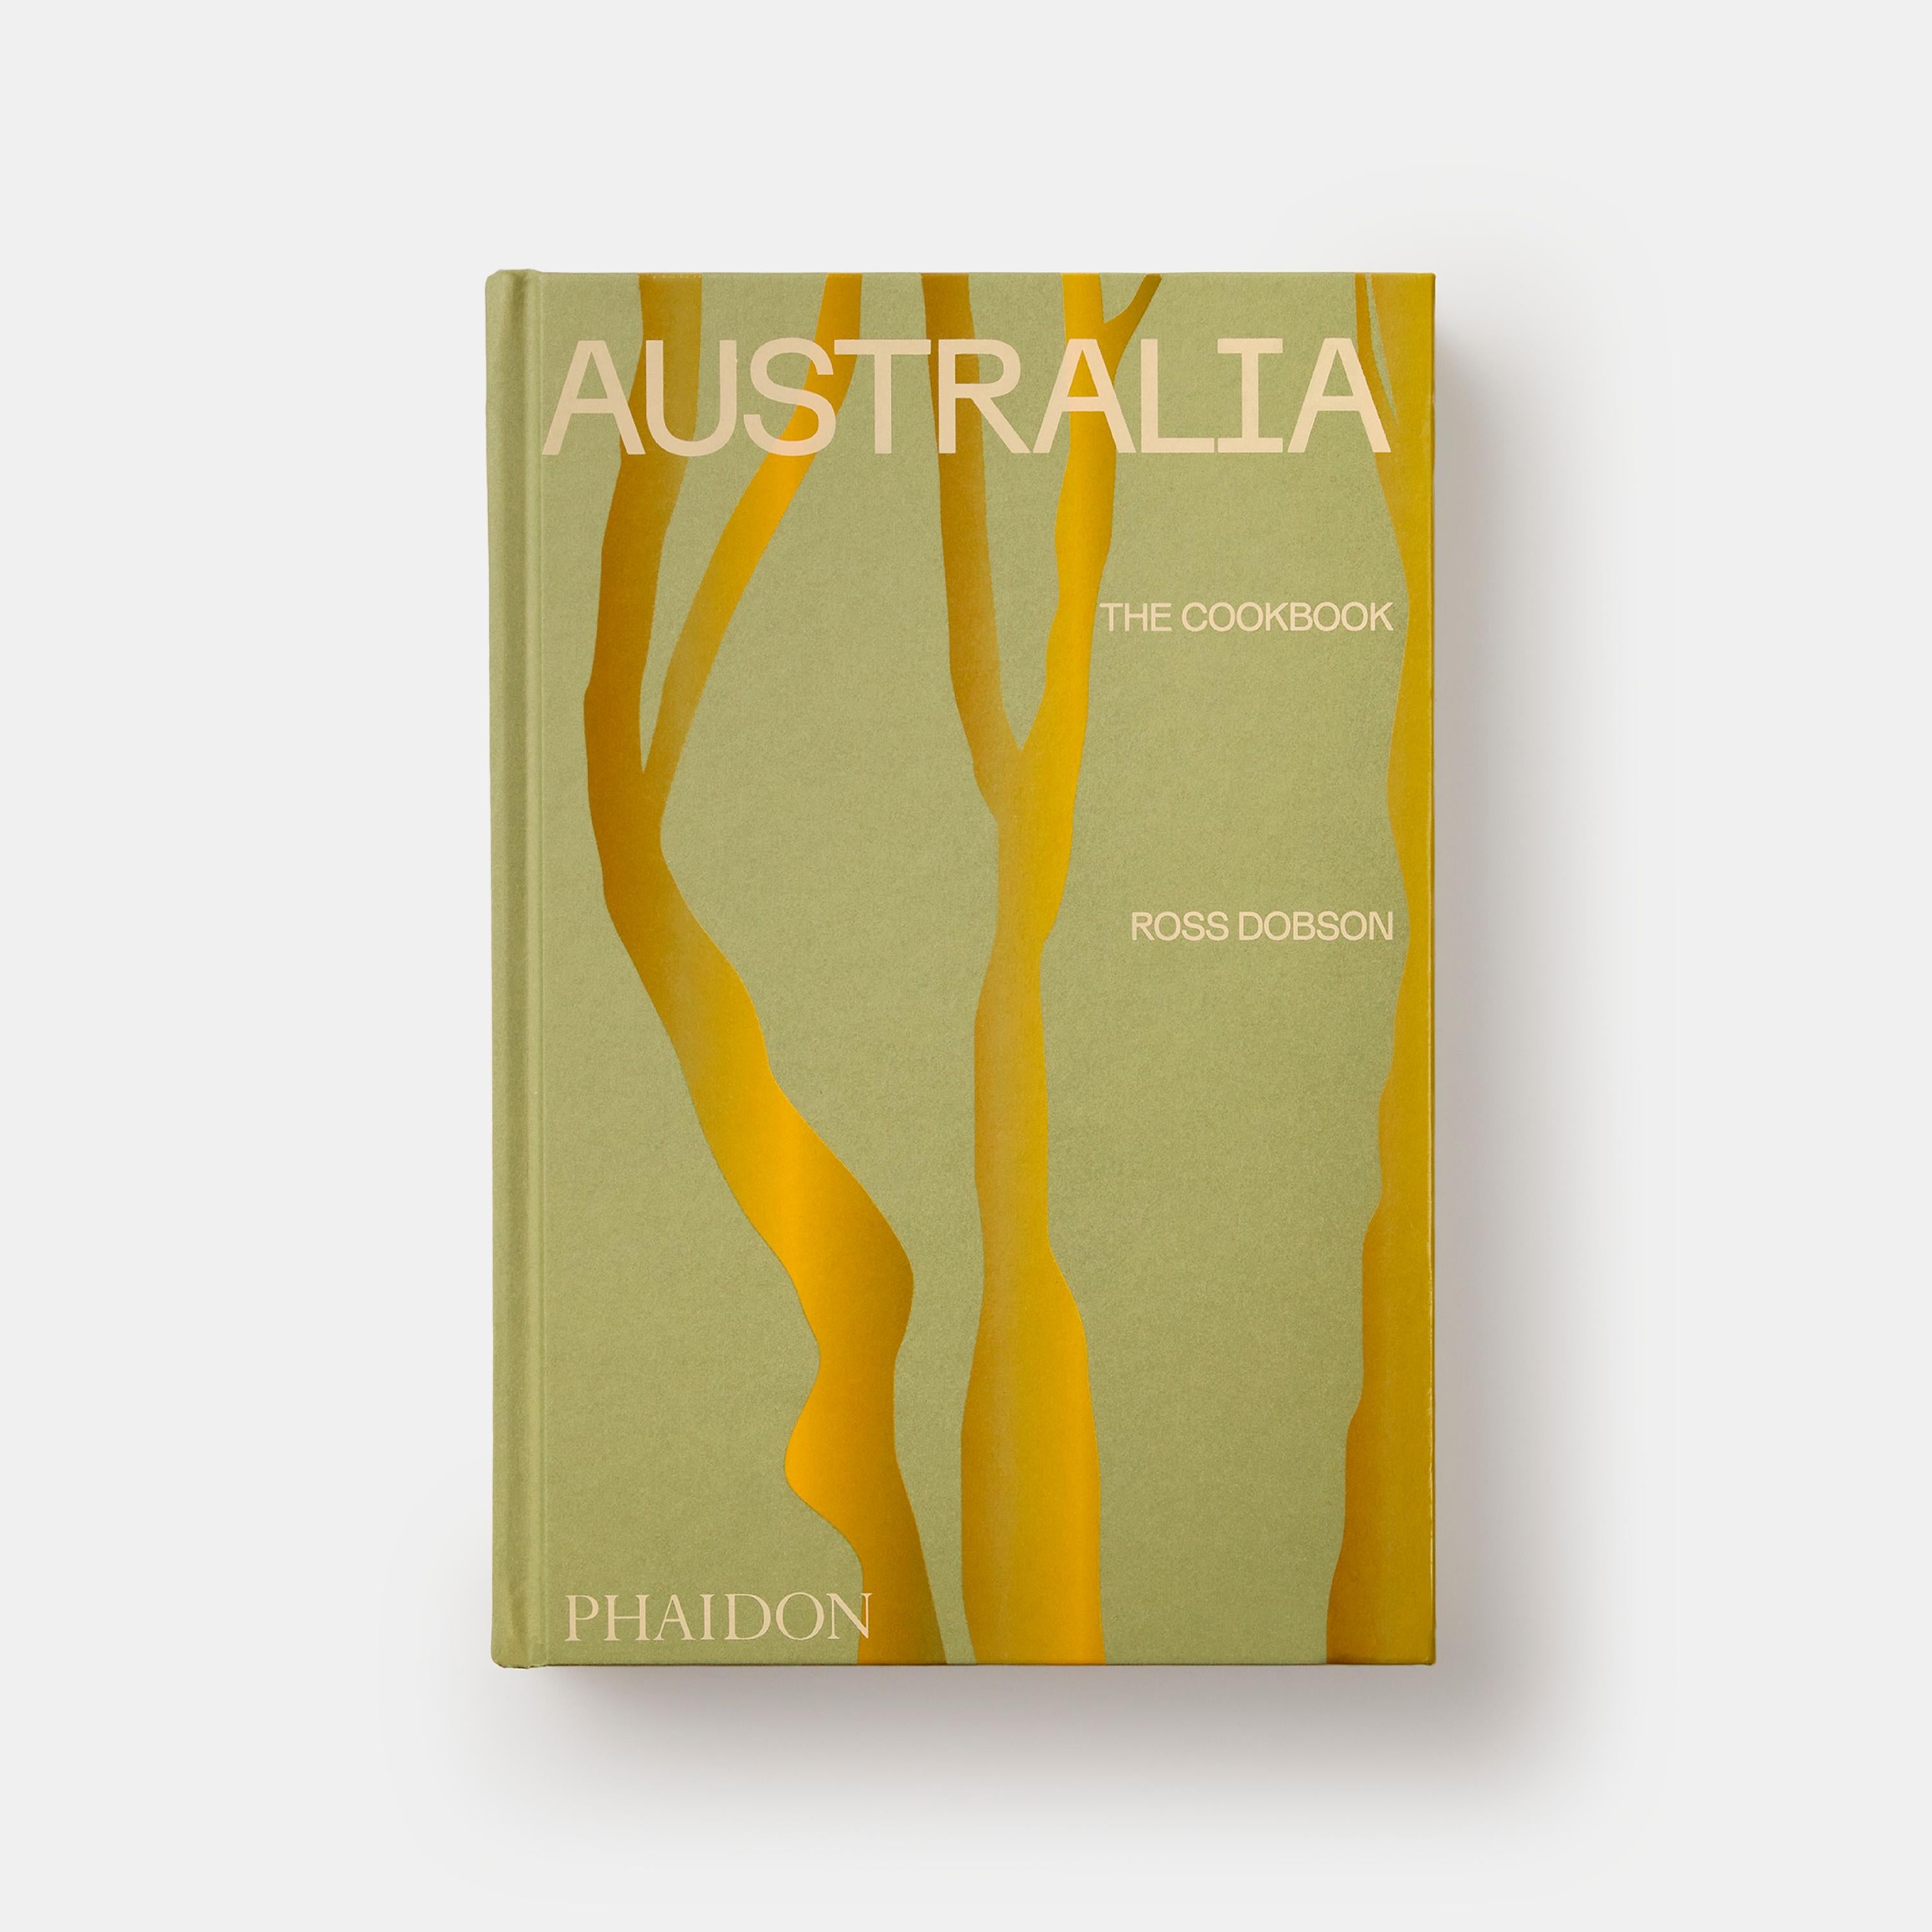 A celebration of Australian cuisine like never before — 350 recipes showcasing the rich diversity of its landscapes and its people.

Australia is a true melting pot of cultures and this is reflected in its cooking. As an island of indigenous peoples